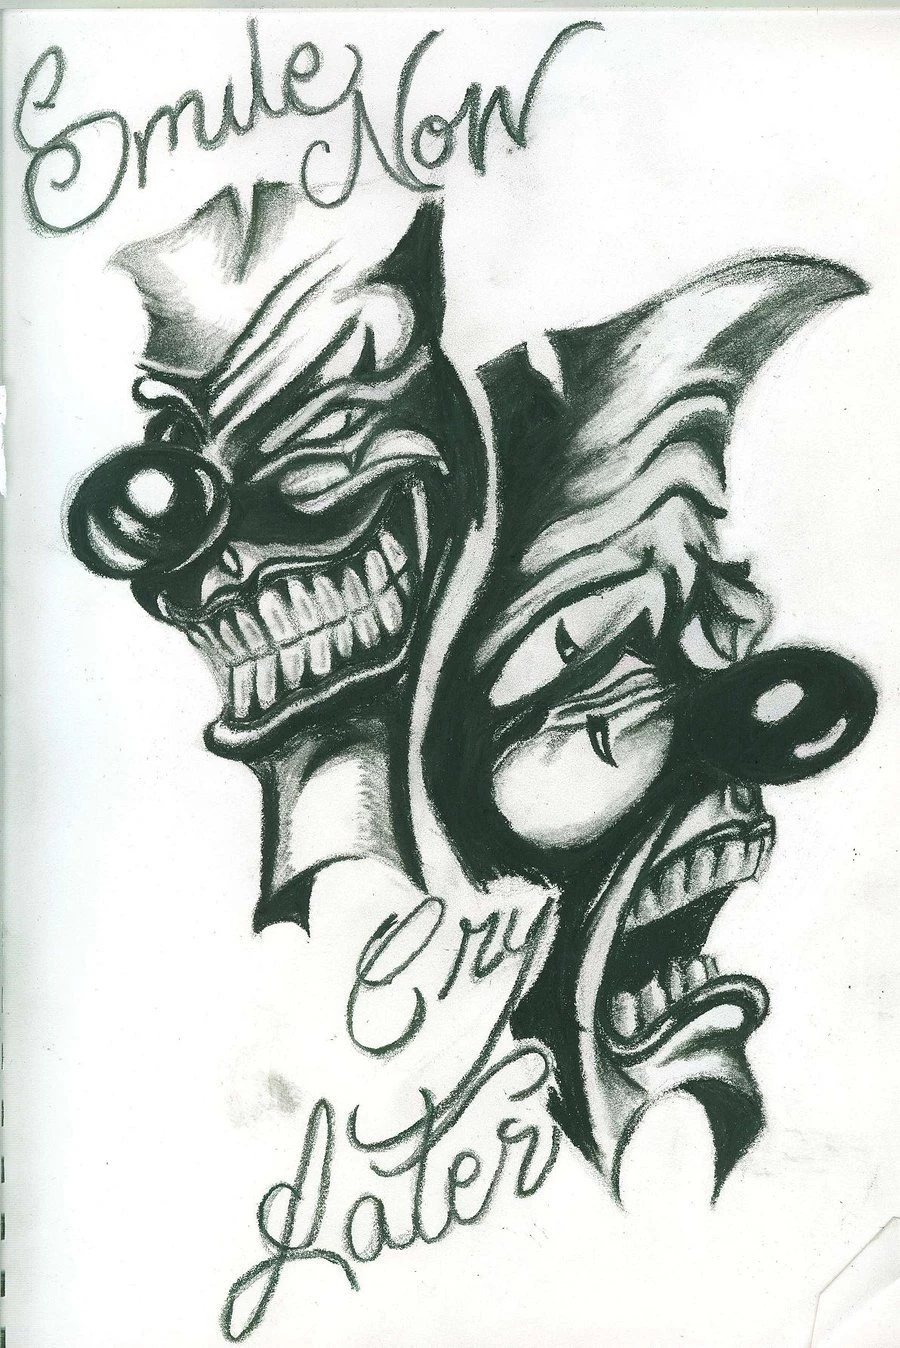 Laugh Now Cry Later Clowns By Incomplete00 On DeviantArt. 